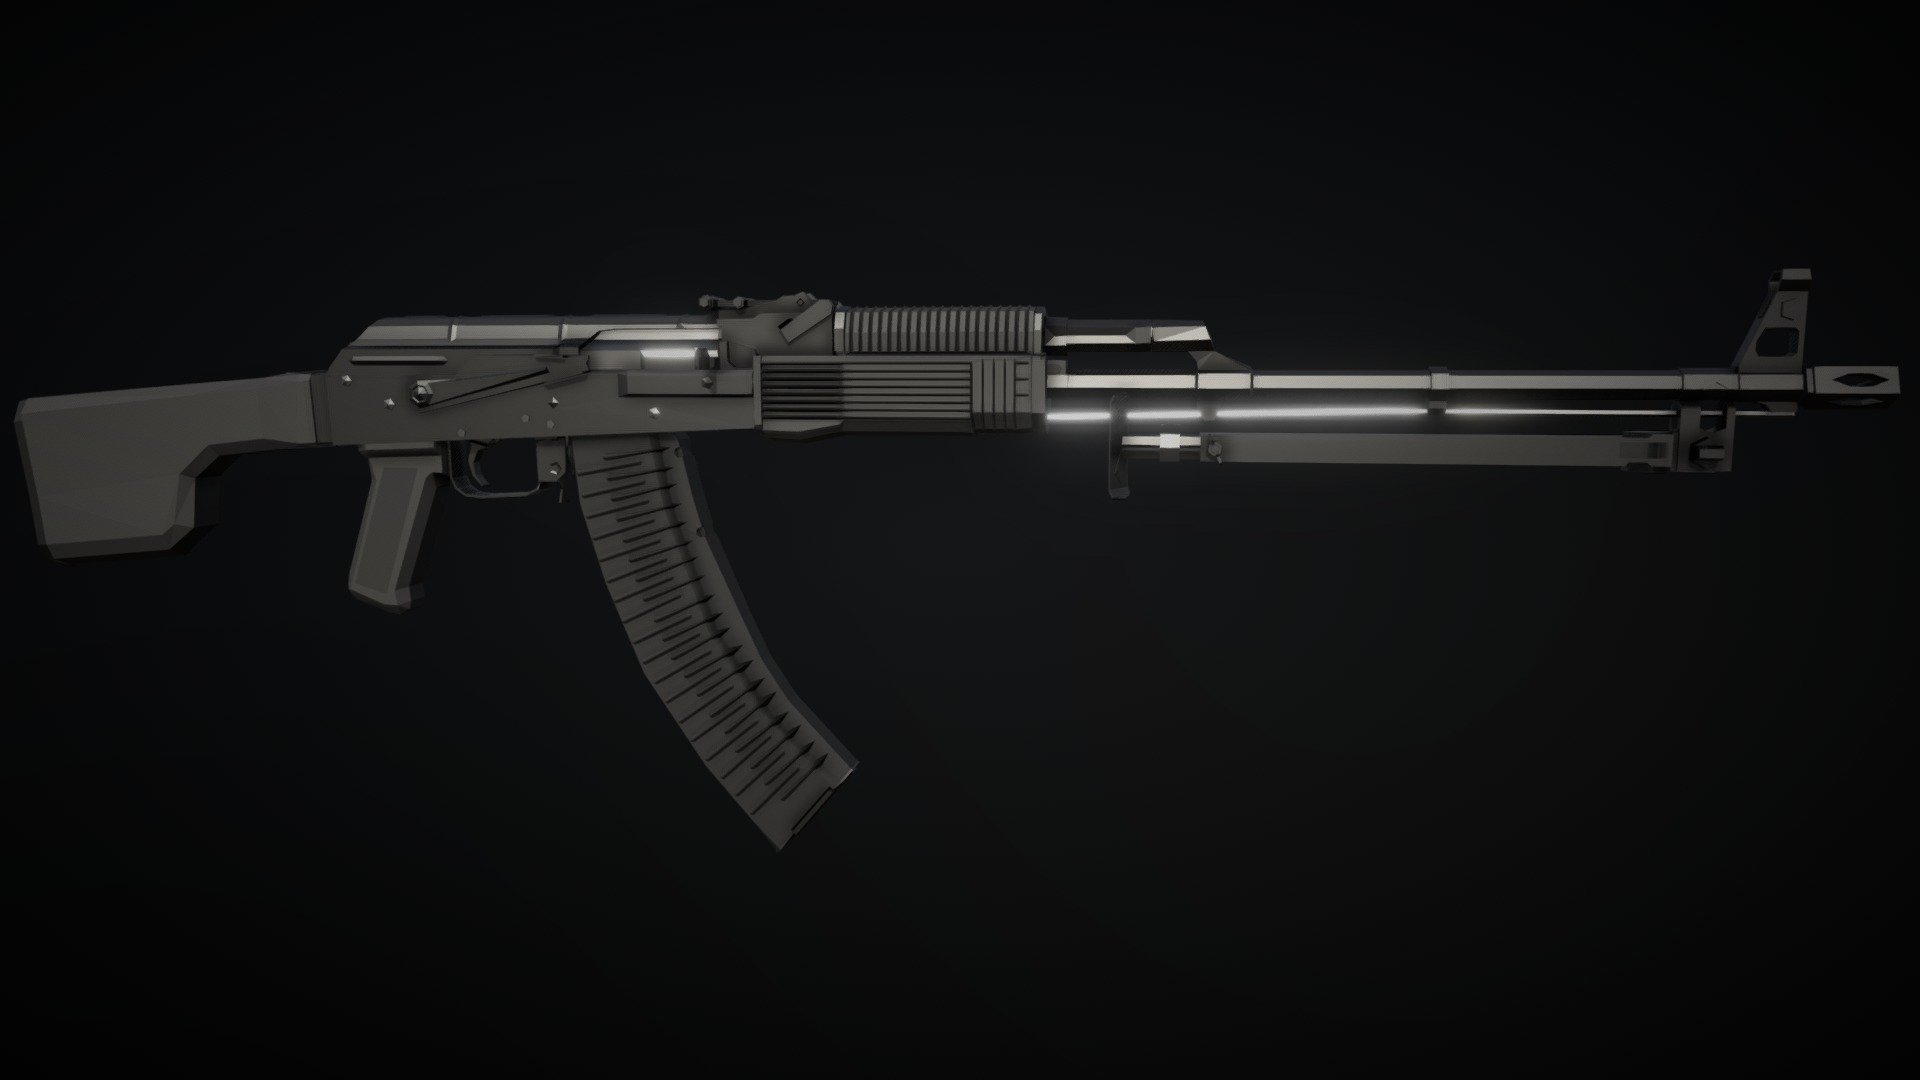 Low-Poly model of the RPK-74m, a light machine gun variant of the AK, chambered in 5.45, with modernized polymer furniture, a folding stock and a Warsaw Pact Rail for attaching optics 3d model